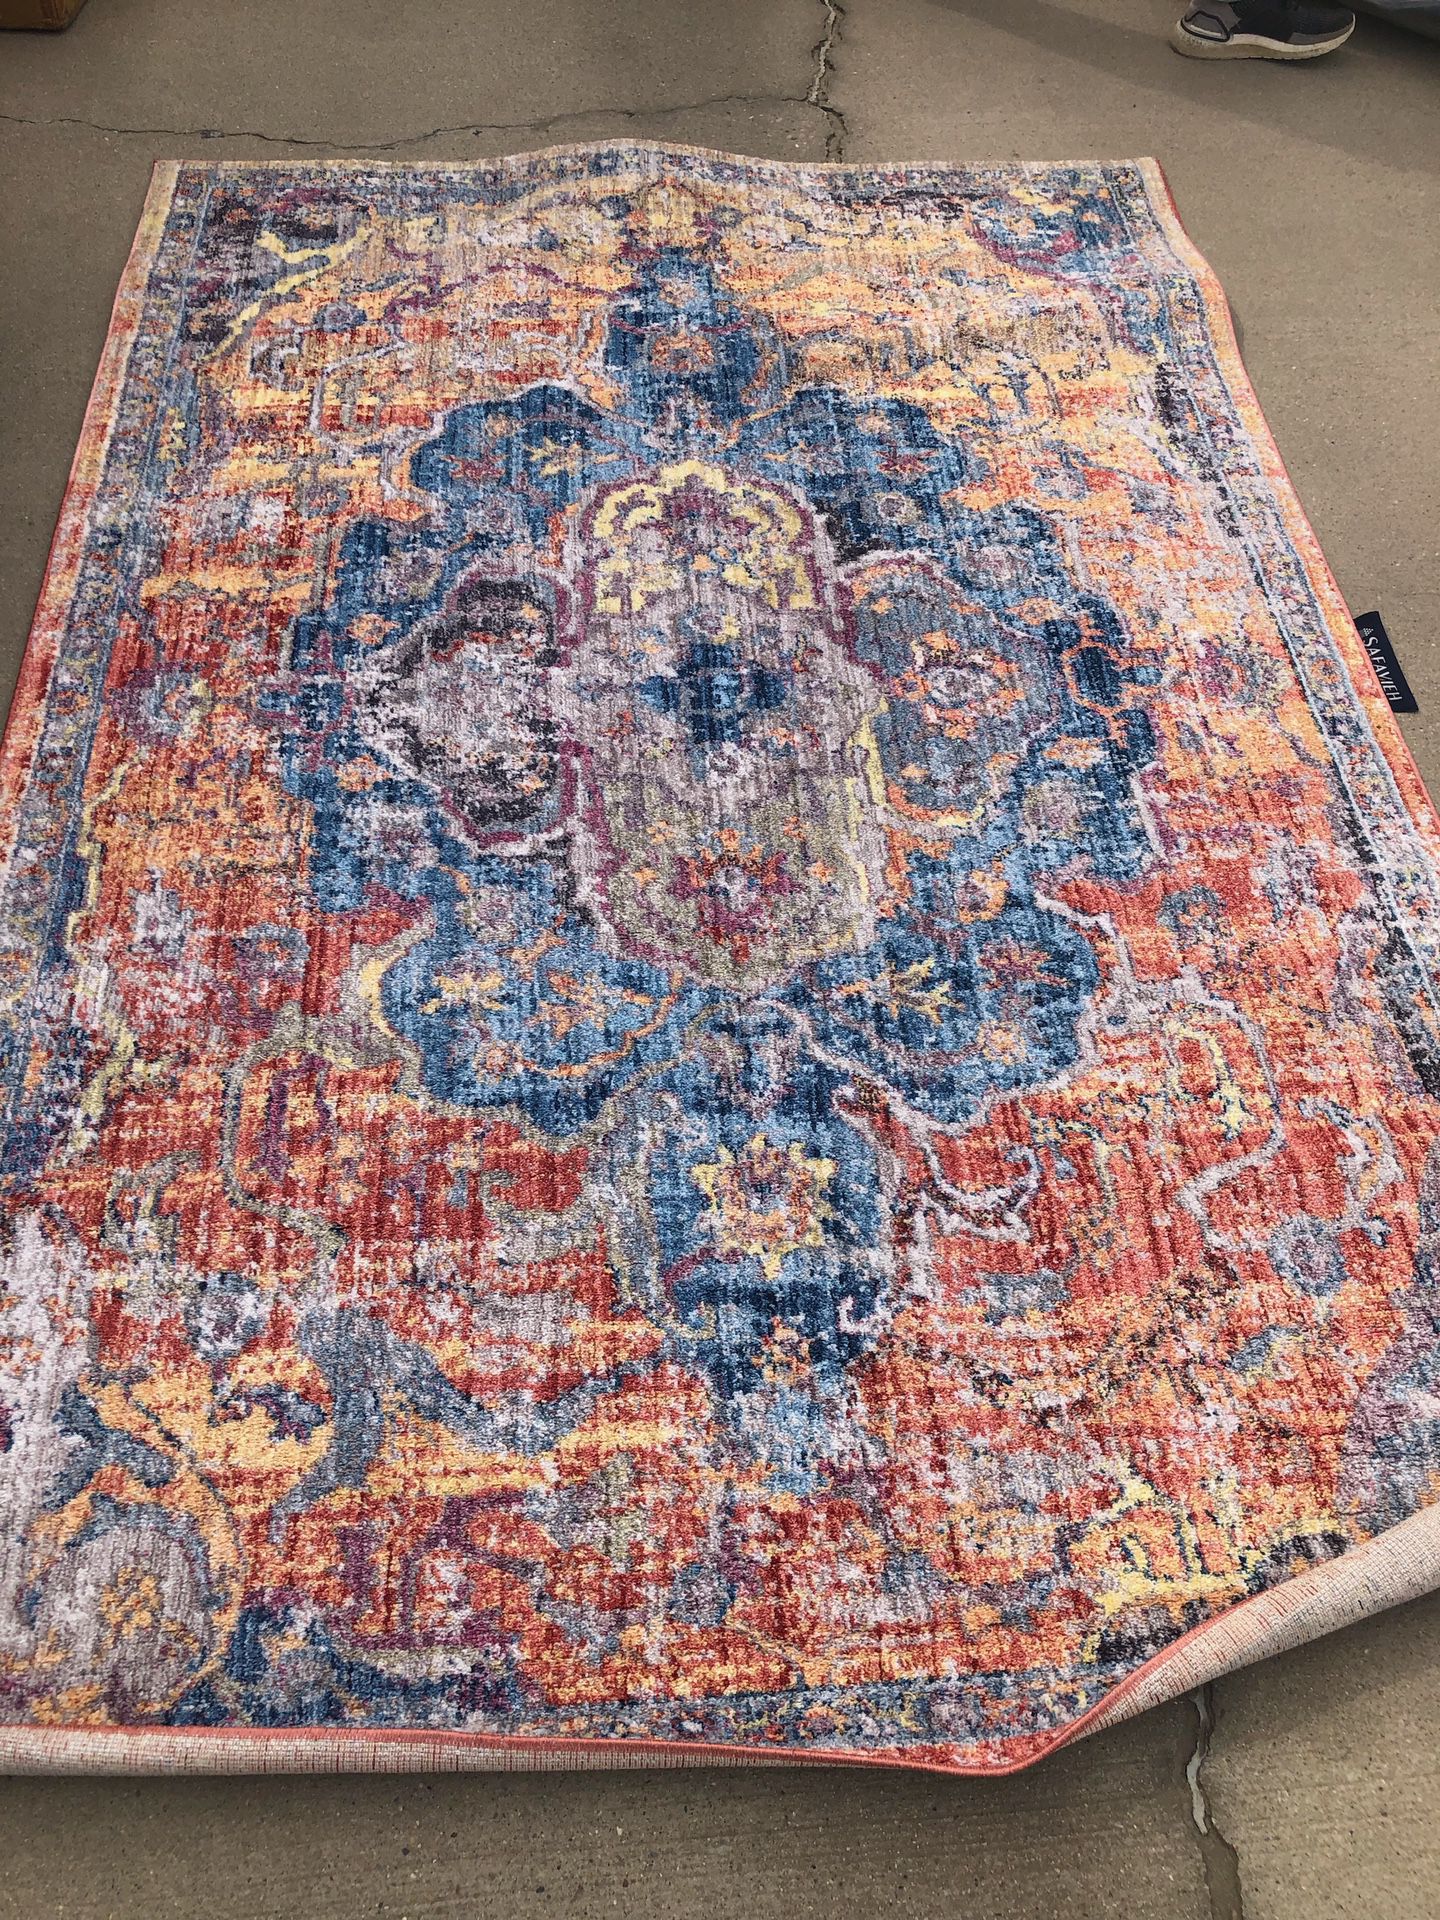 Brand new colorful area rug. Retails for over $220